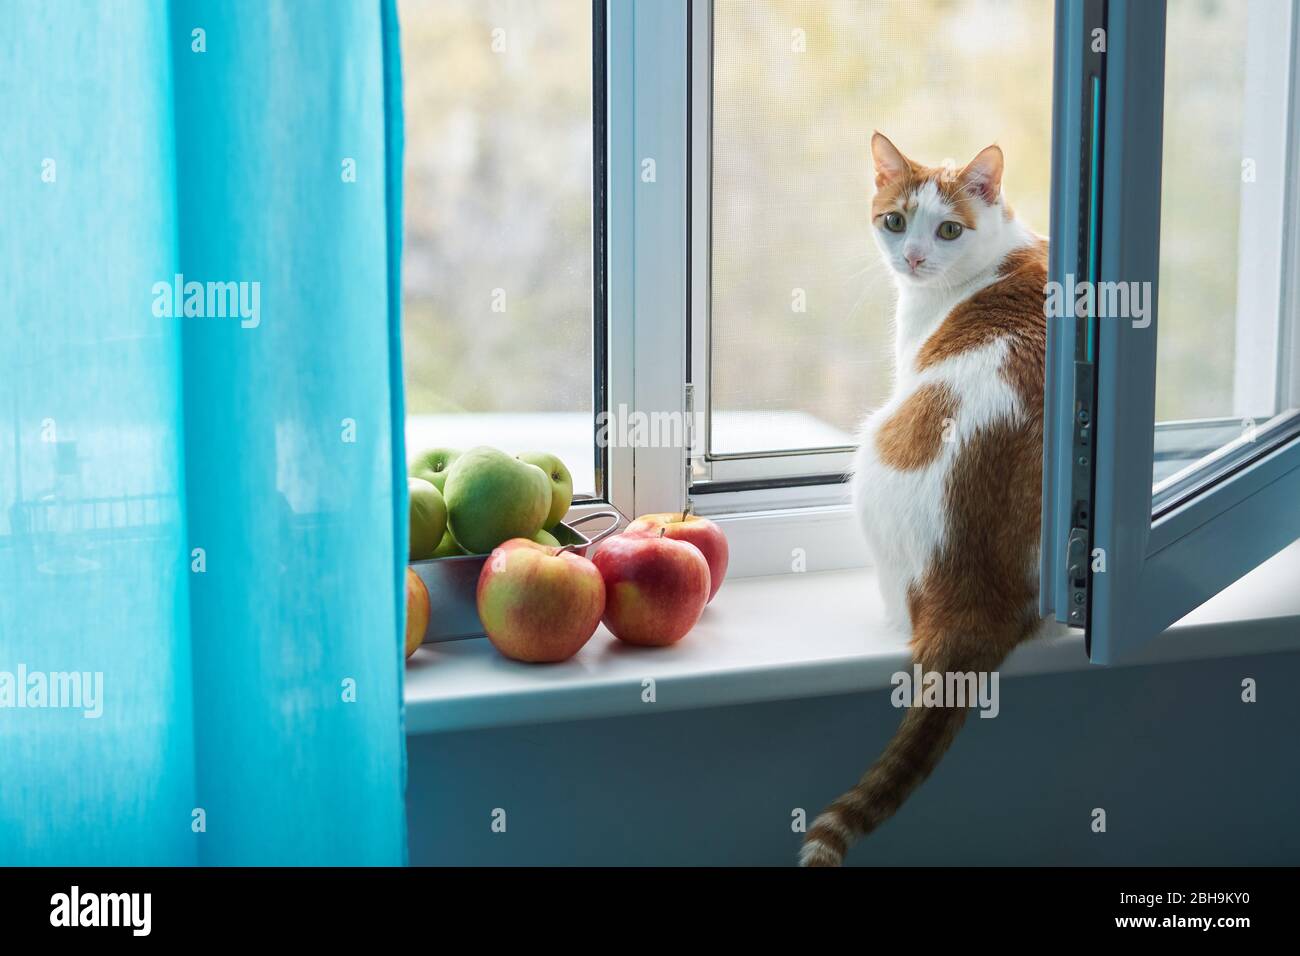 White and ginger cat sitting on a windowsill next to green and red apples. Cat looking straight to the camera, blue curtains are closing part of the w Stock Photo